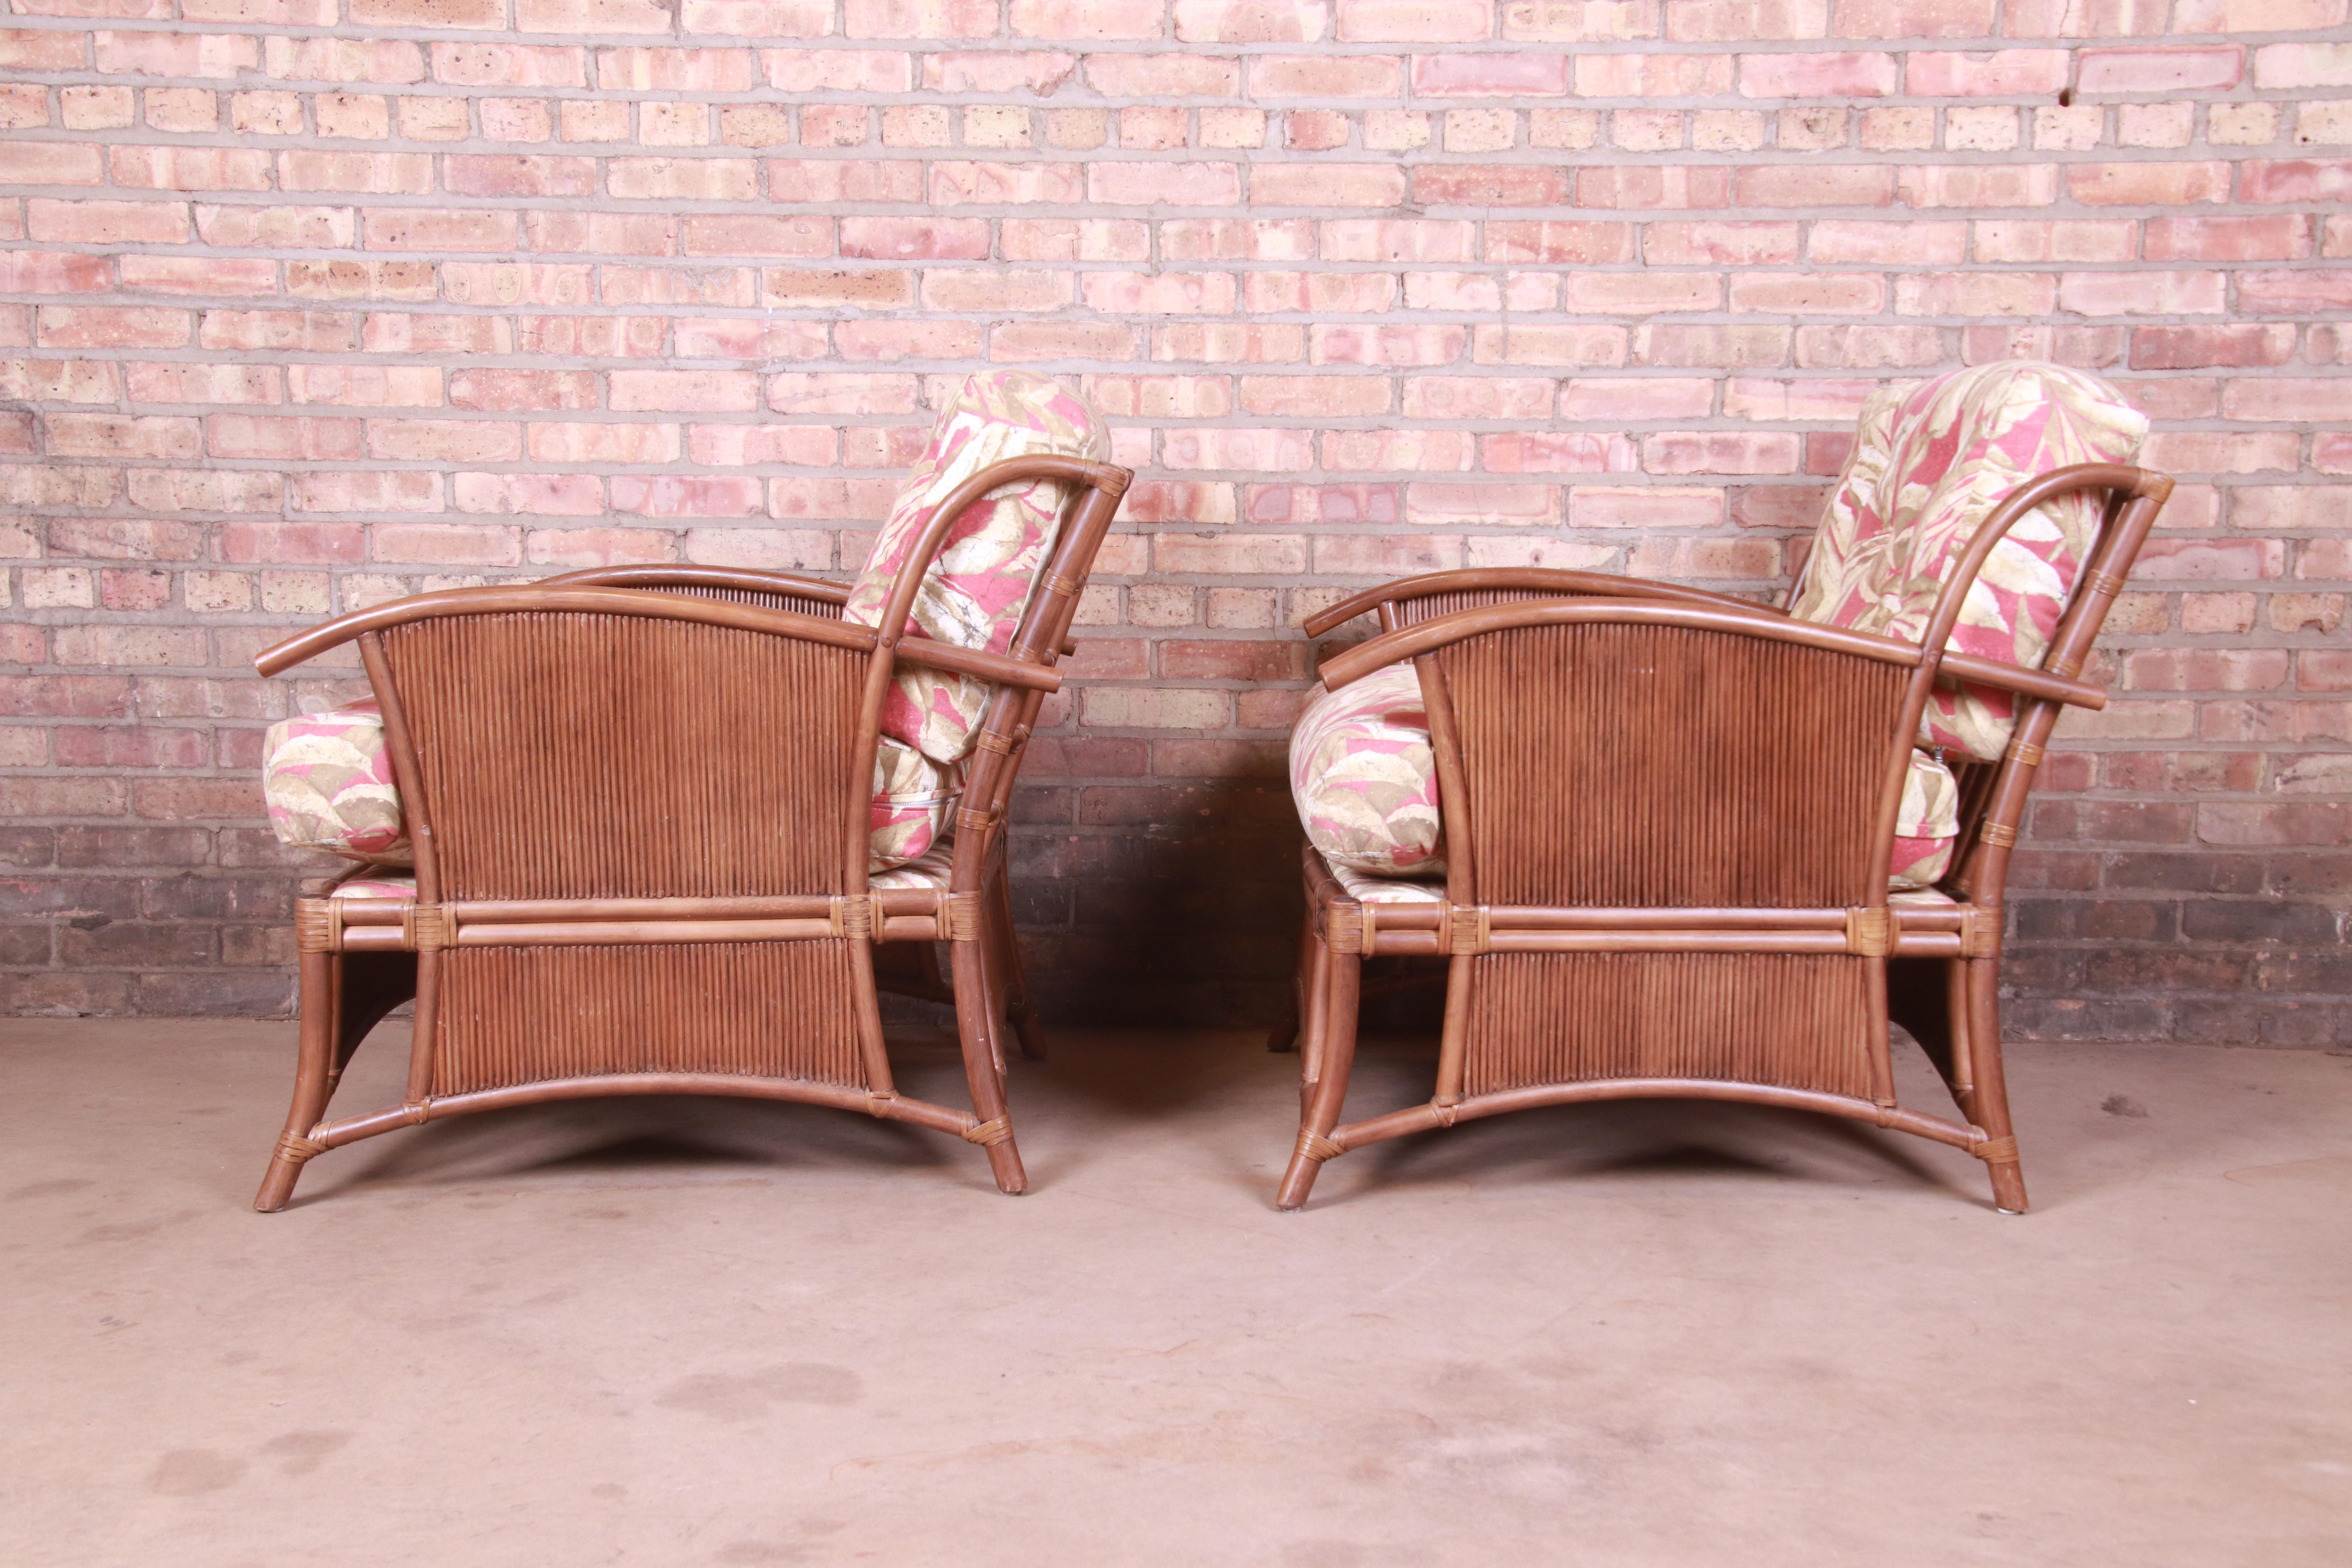 Ficks Reed Hollywood Regency Bamboo Rattan Lounge Chairs, Pair 10